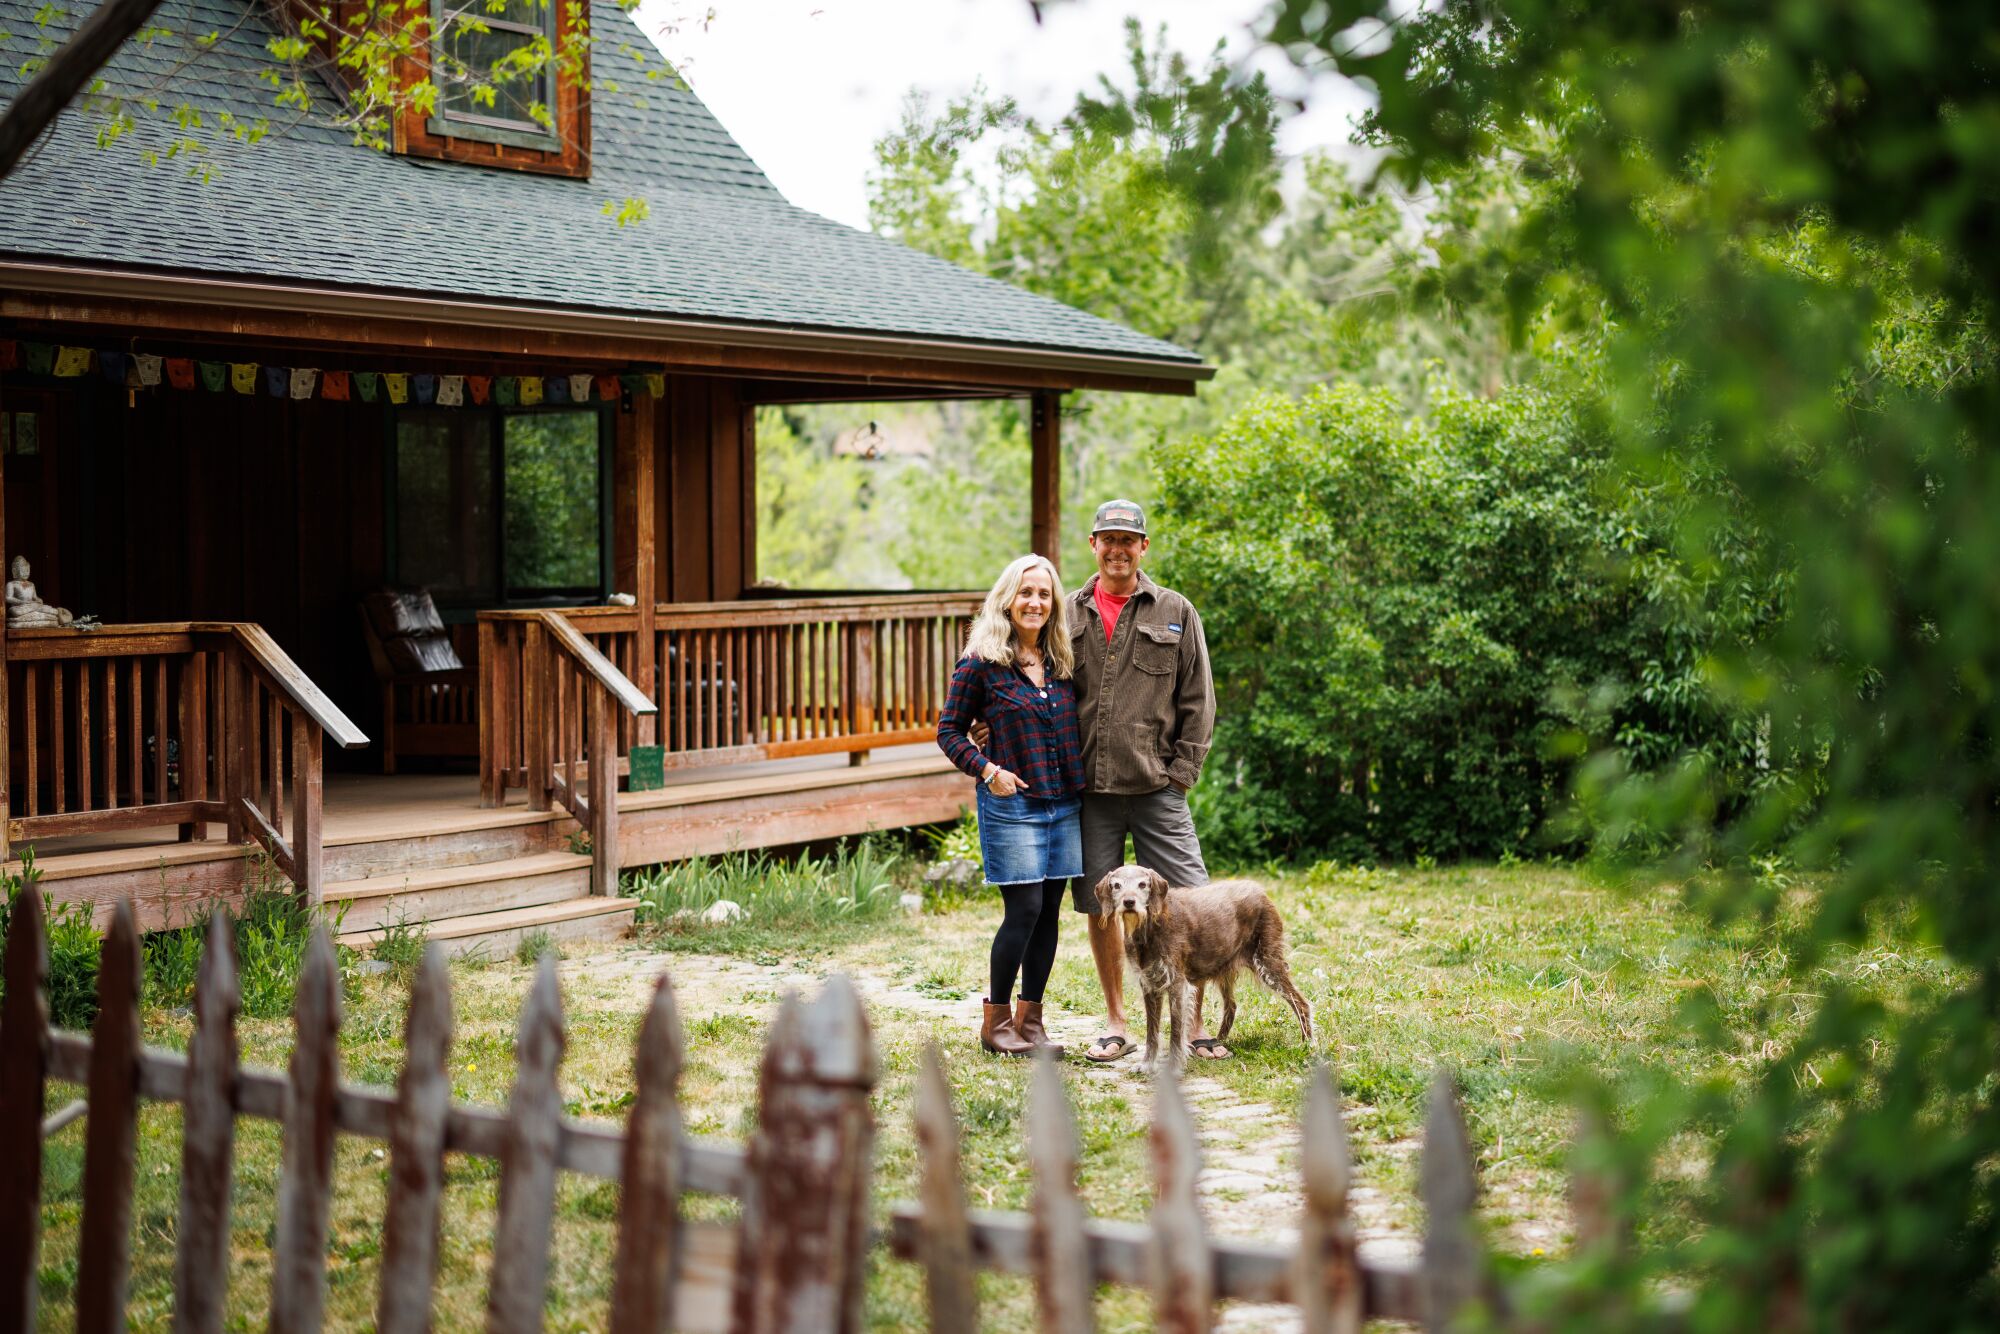 A woman, man and dog standing outside a wood home surrounded by trees